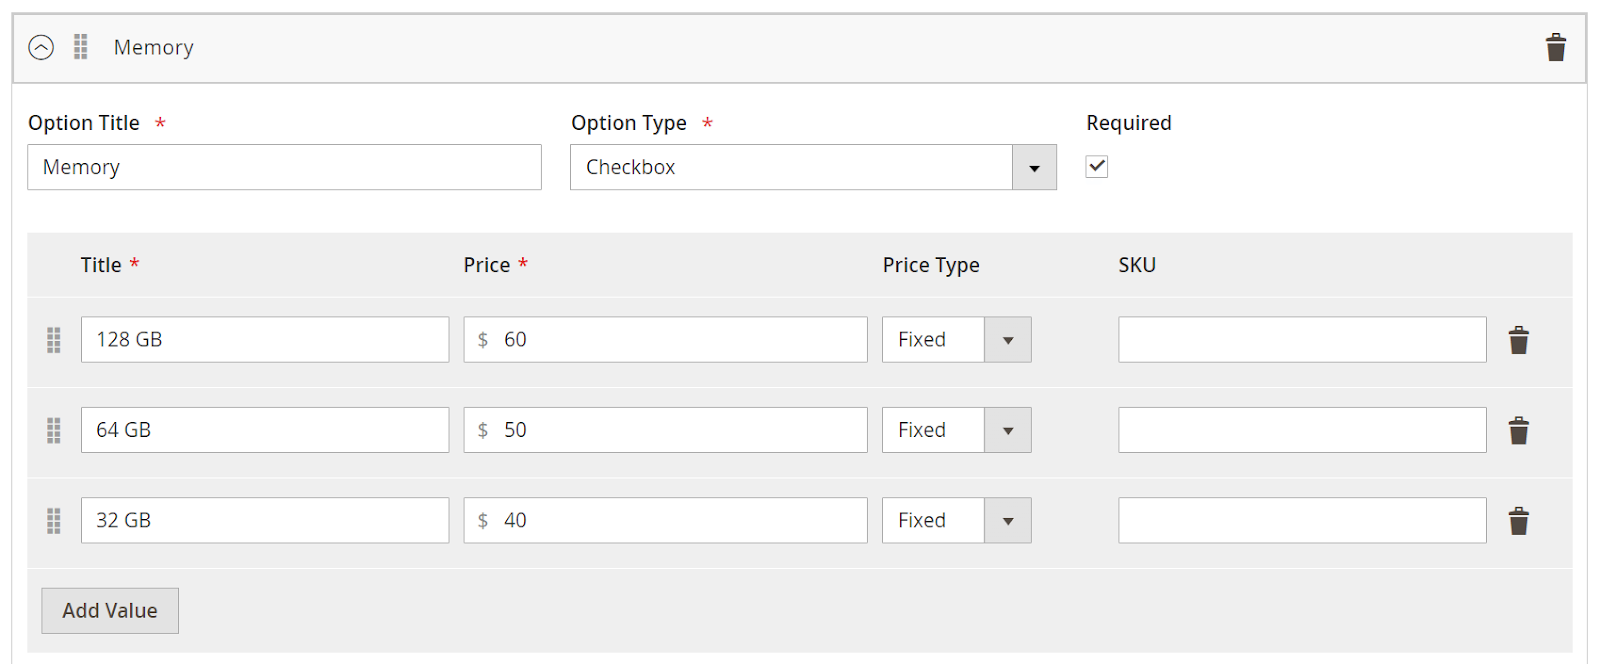 Configure Product Custom Options in Magento 2